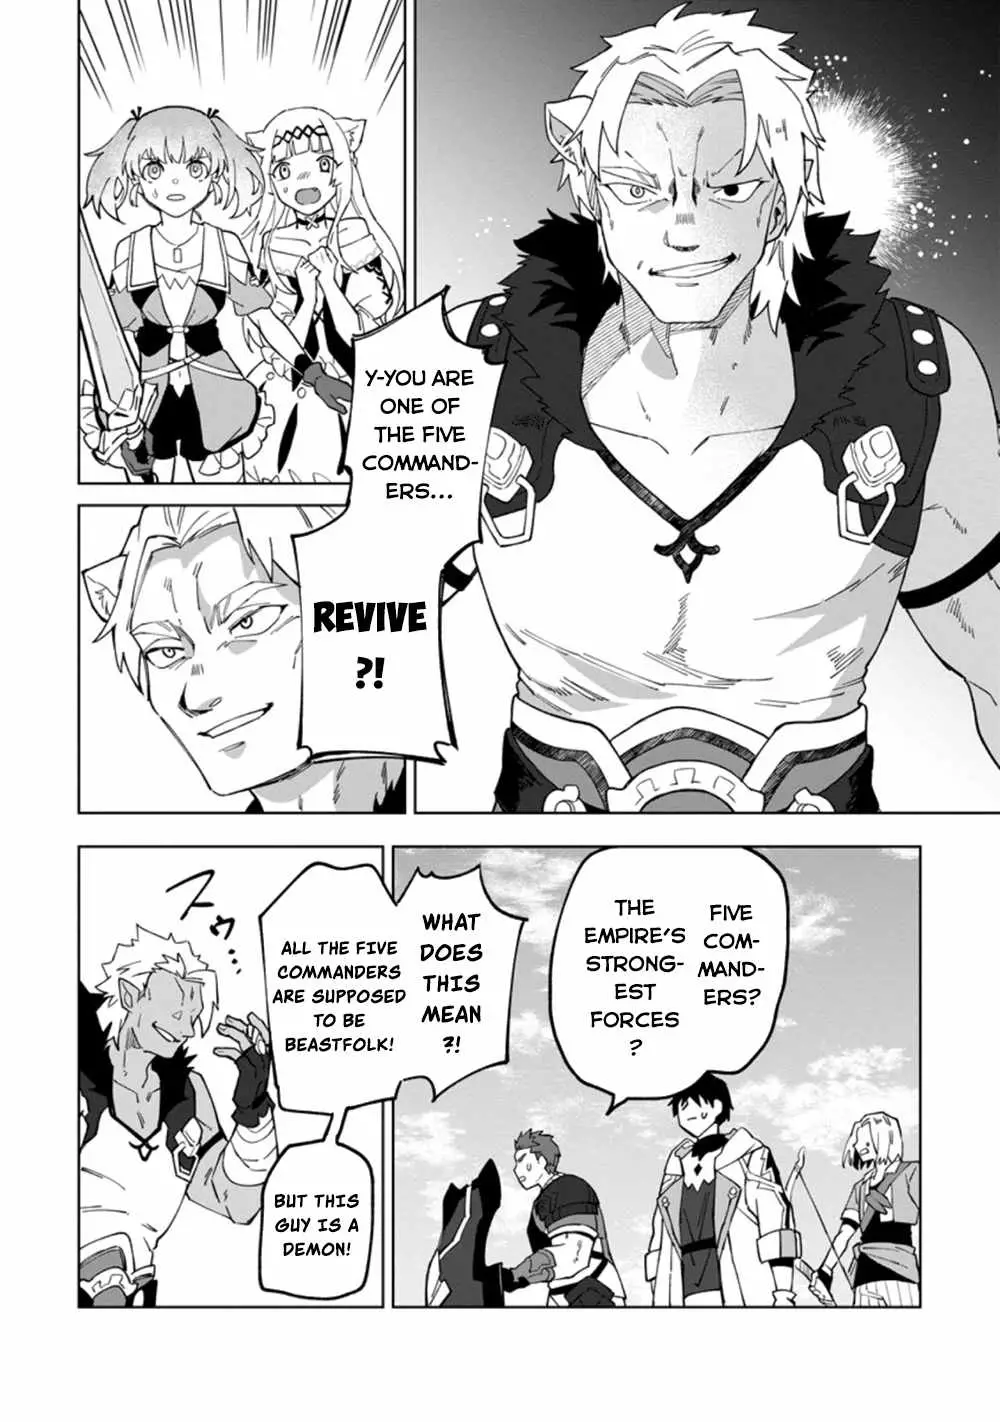 The White Mage Who Was Banished From The Hero's Party Is Picked Up By An S Rank Adventurer~ This White Mage Is Too Out Of The Ordinary! - 15 page 19-67fe0b37